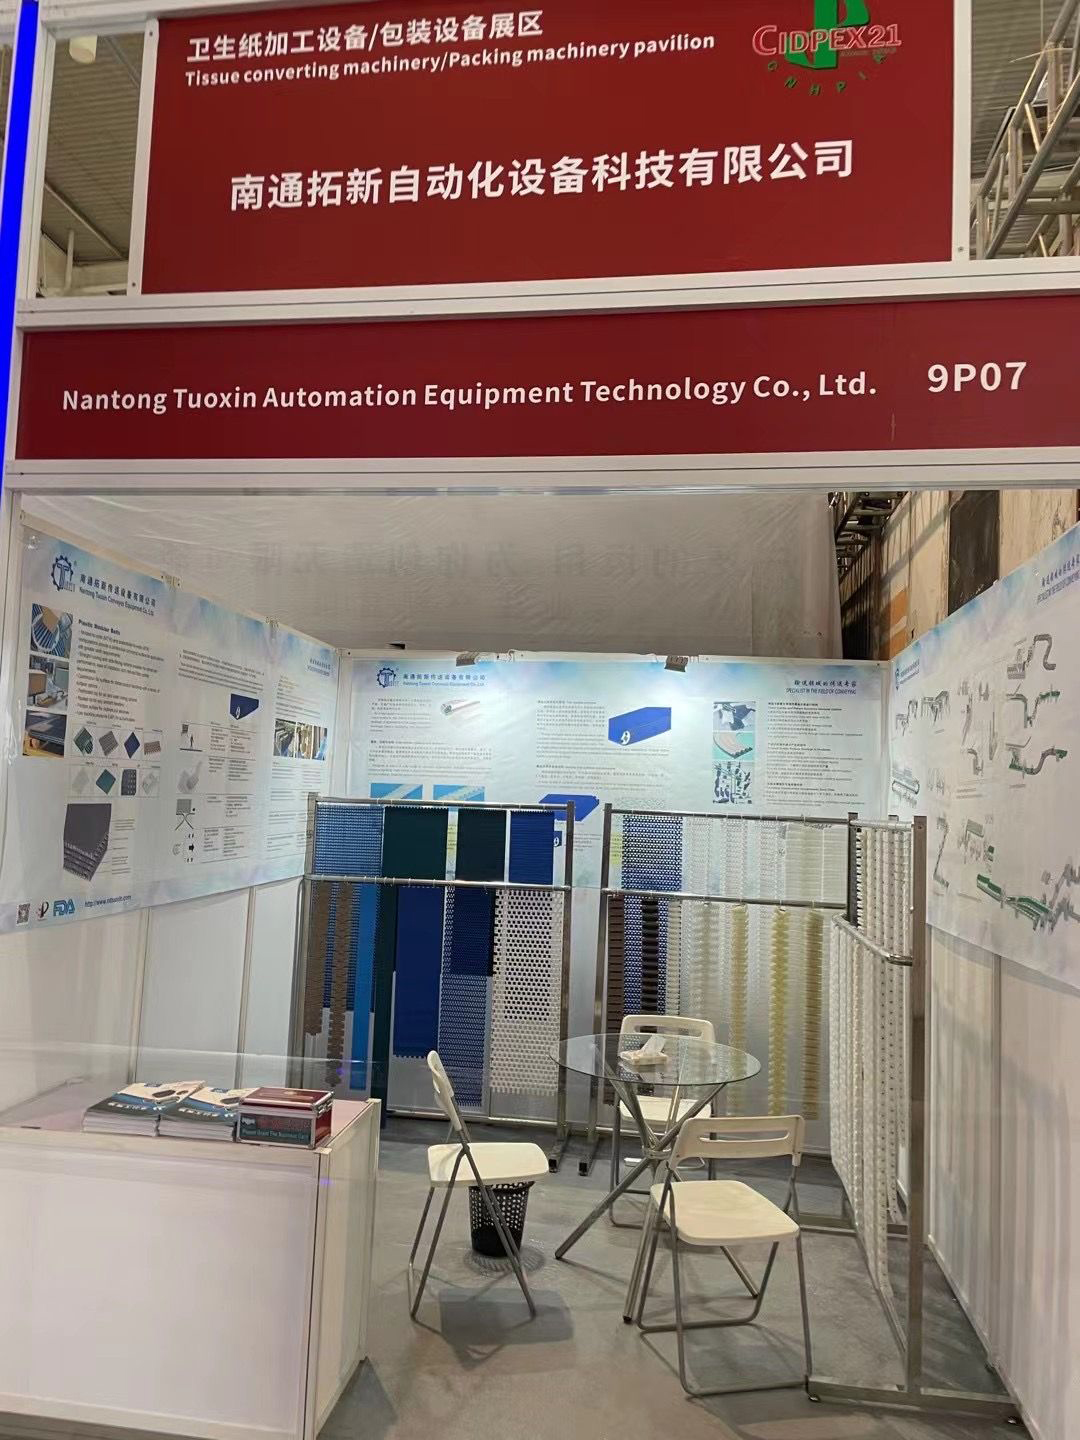 Shanghai corrugated exhibition in July 2021 (3)